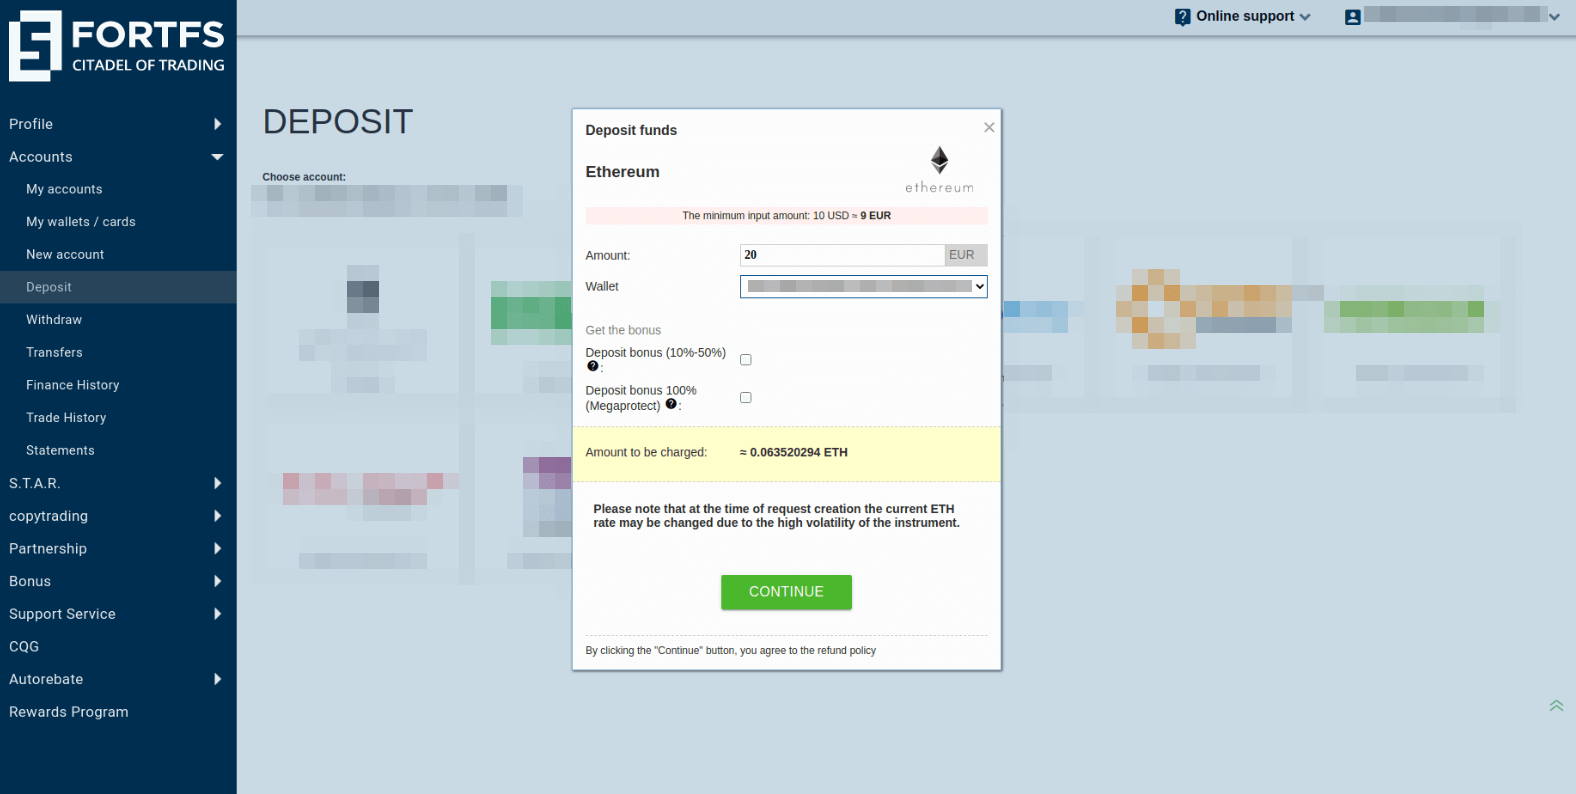 Specify the deposit amount, select the number of your ETH wallet